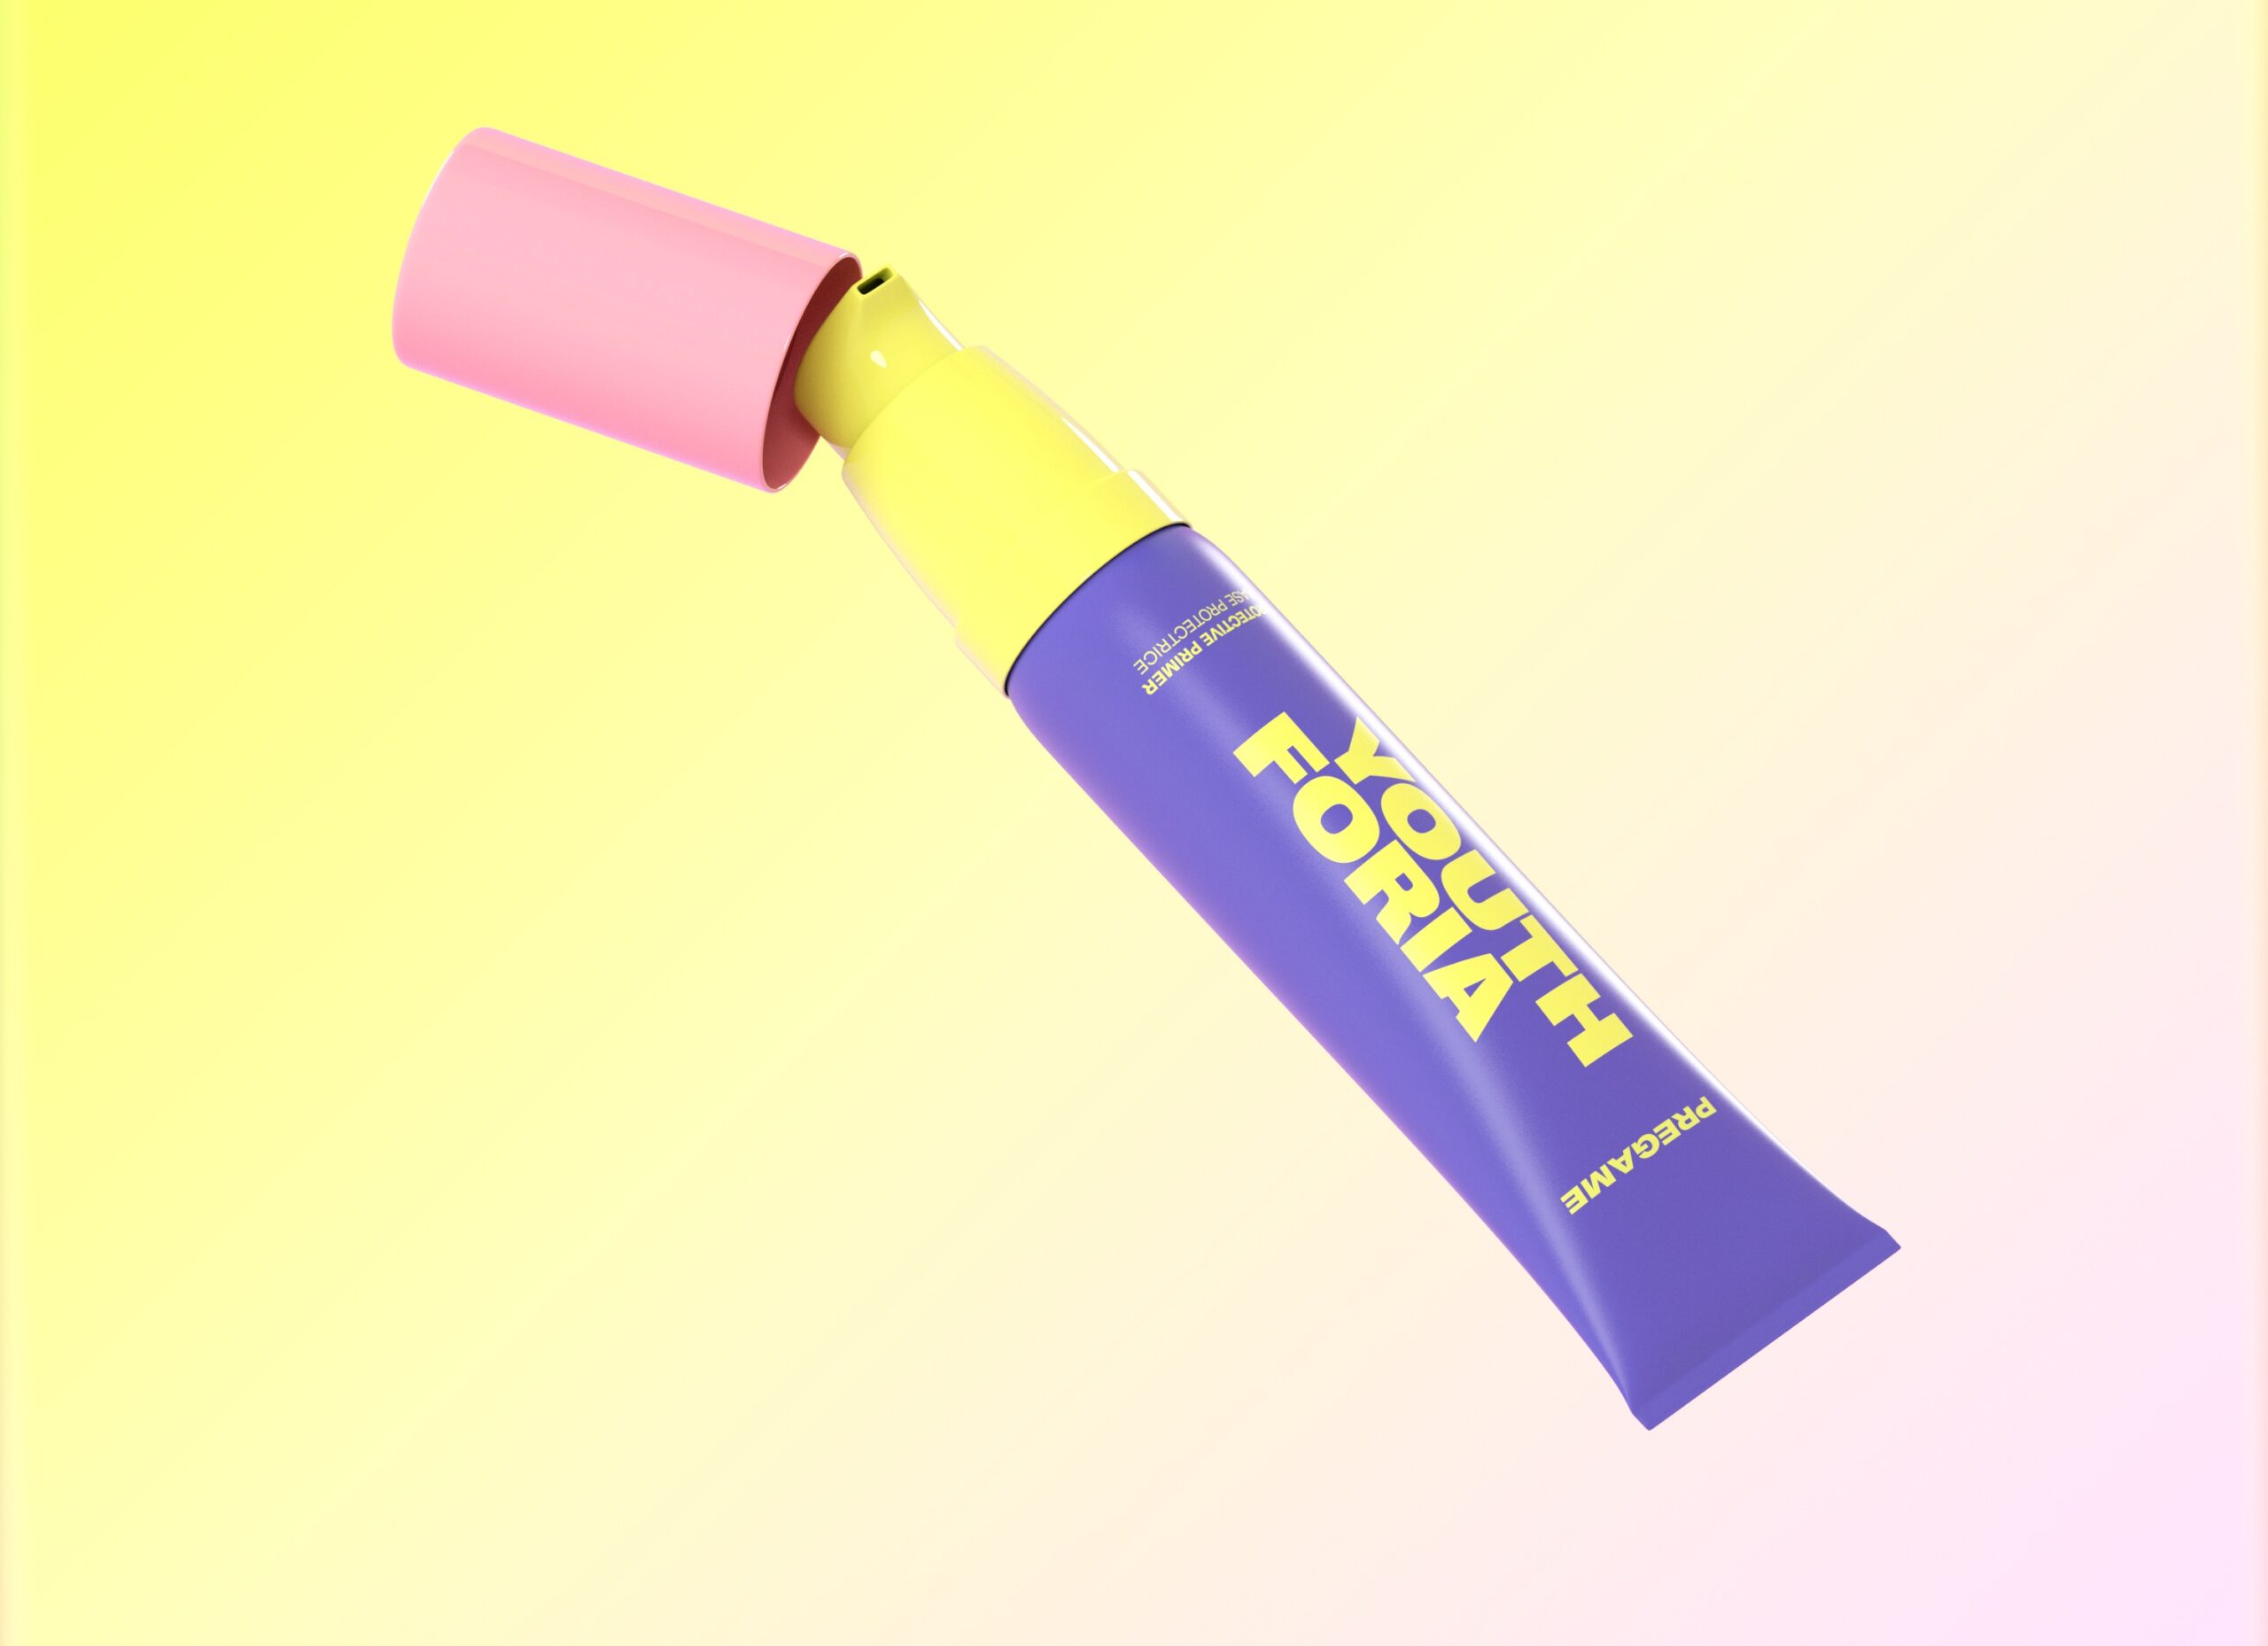 Youthforia is a skin-first brand with one of the best primers in the game.